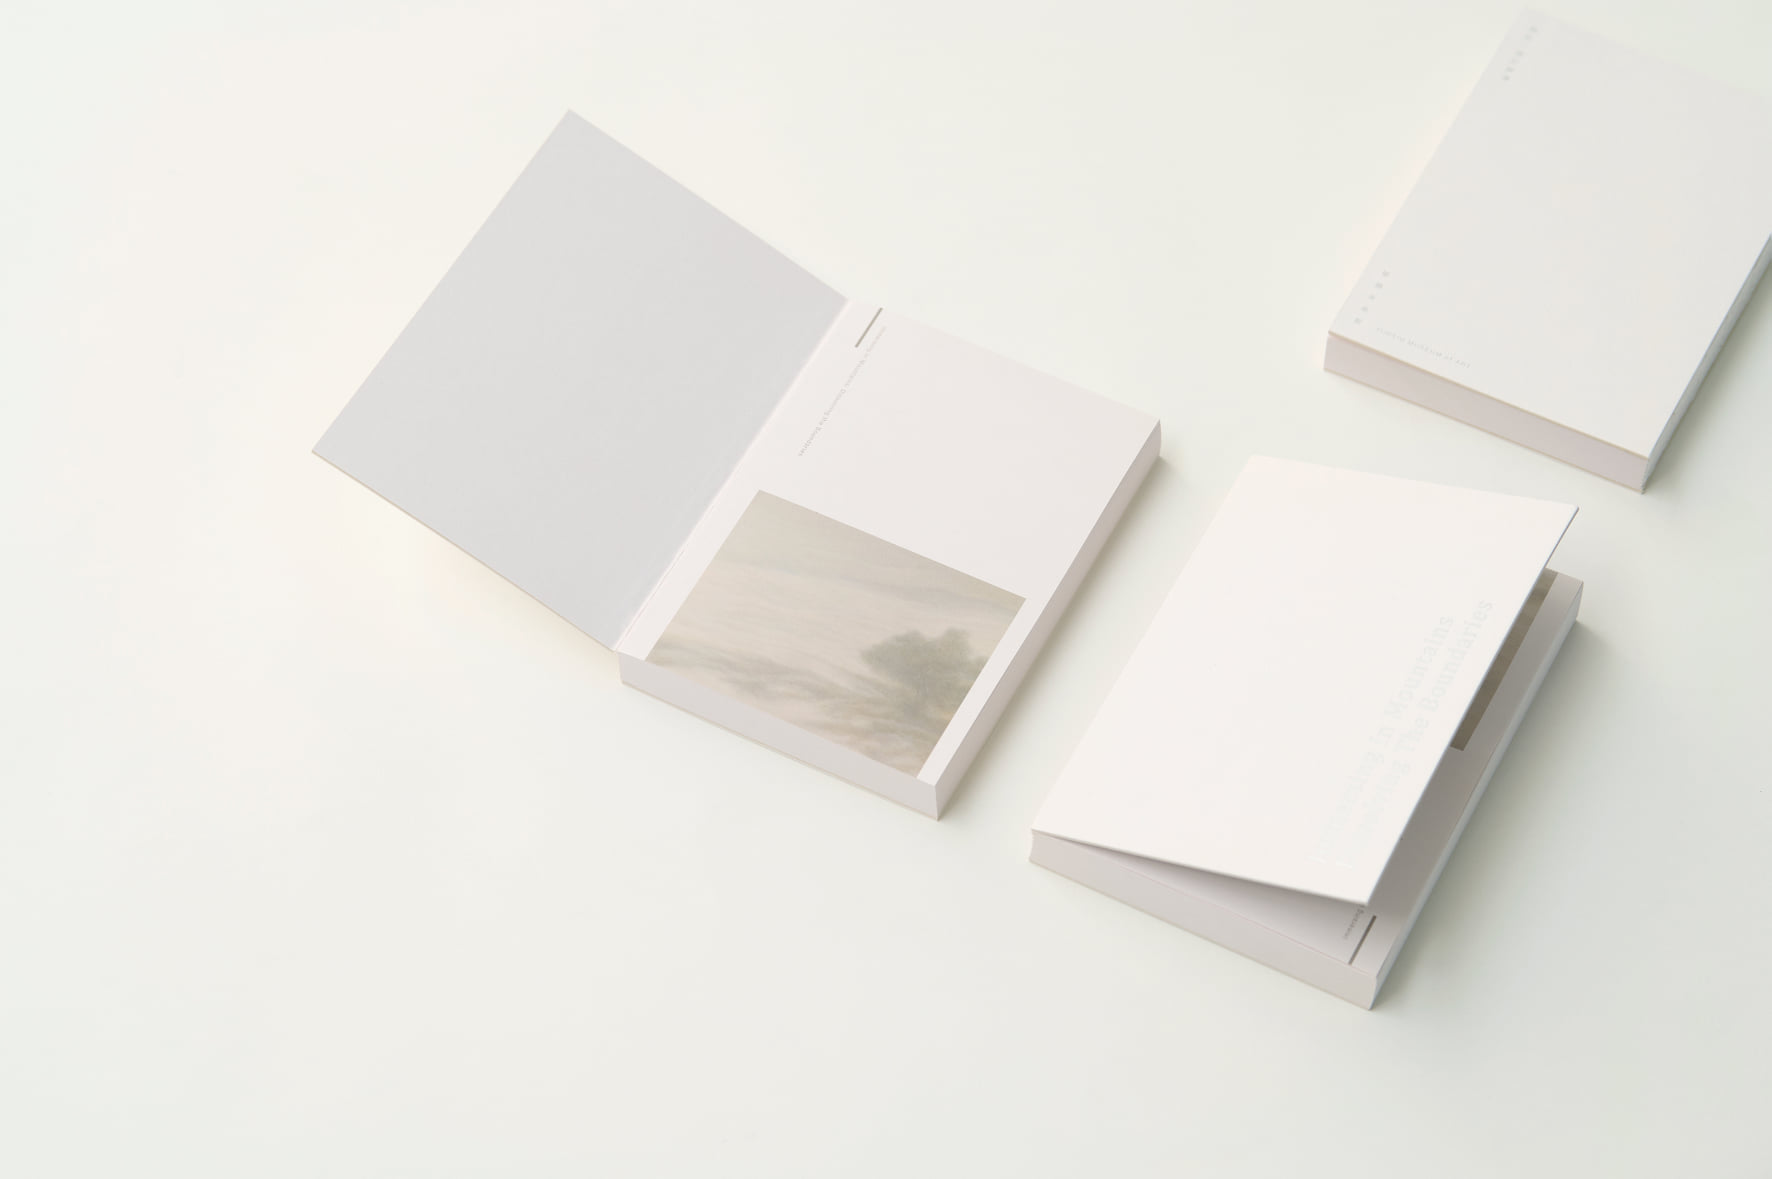 Immersing in Mountains: Dissolving the Boundaries-LIN Wei-Hsiang Plain White Notebook Group